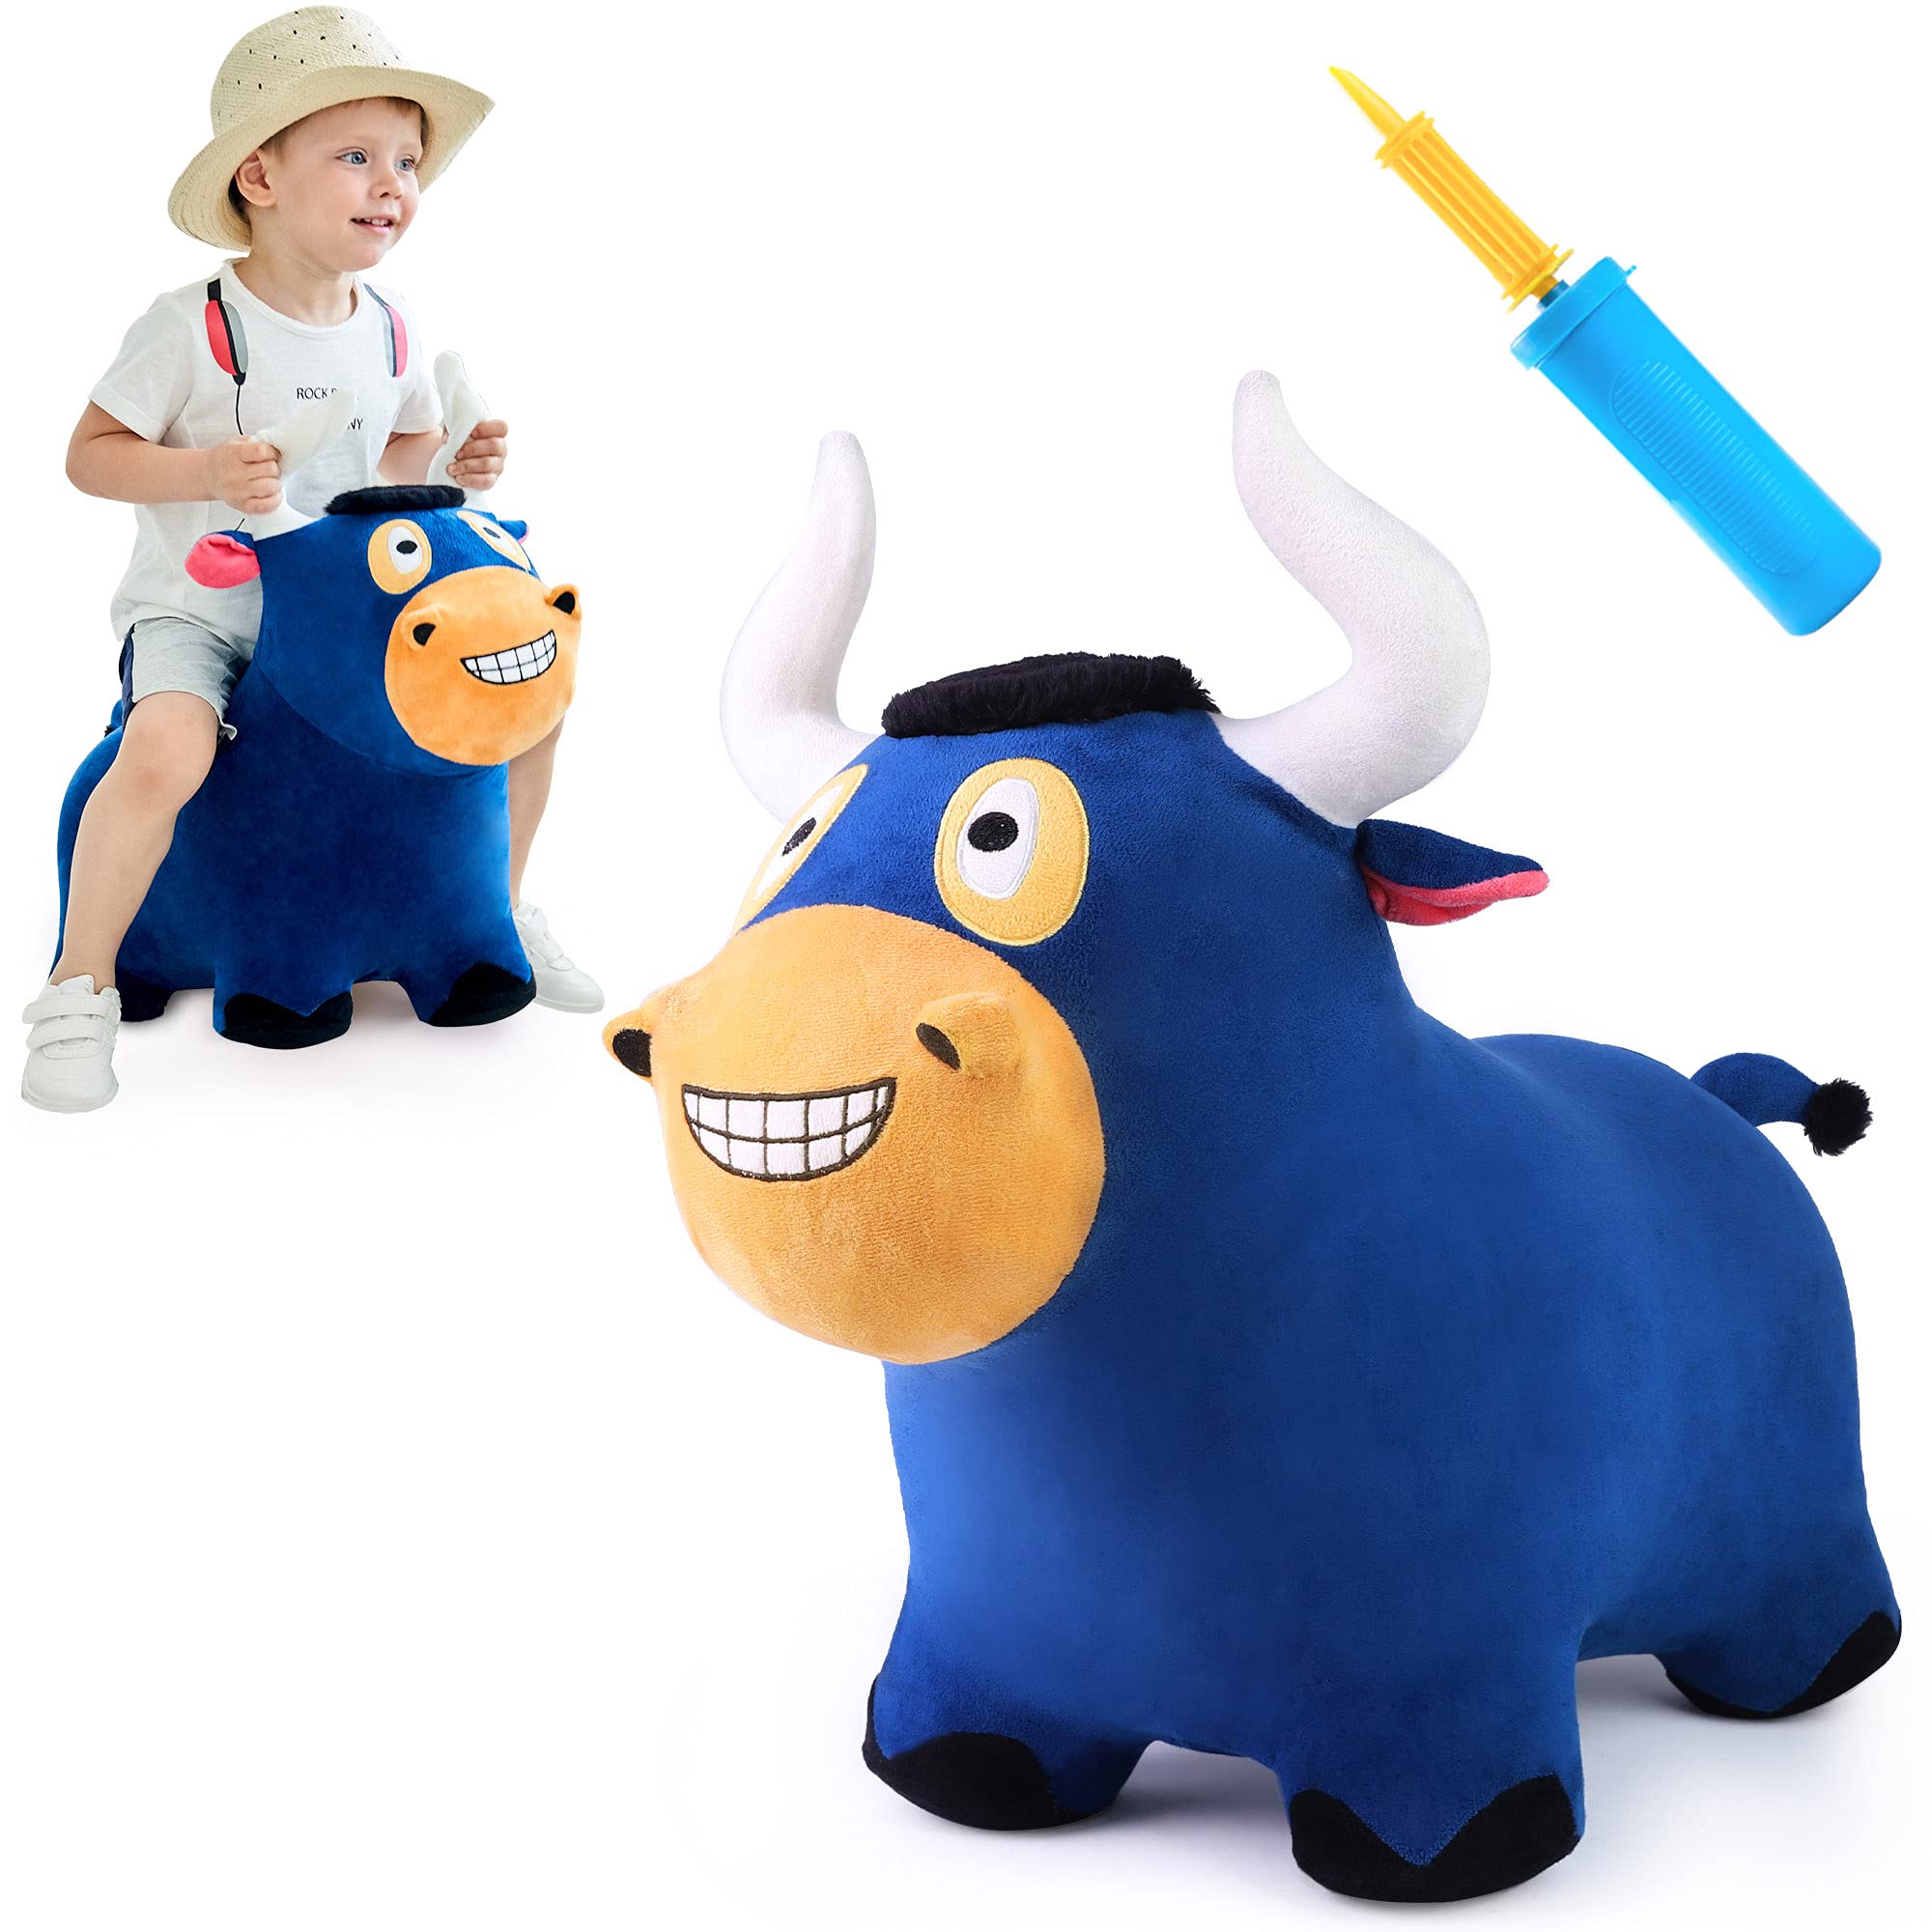 iPlay, iLearn Bouncy Pals Bull Hopper Toy, Toddler Plush Bouncing Horse, Kids Inflatable Ride Farm Animal Bouncer W Pump, Indoor